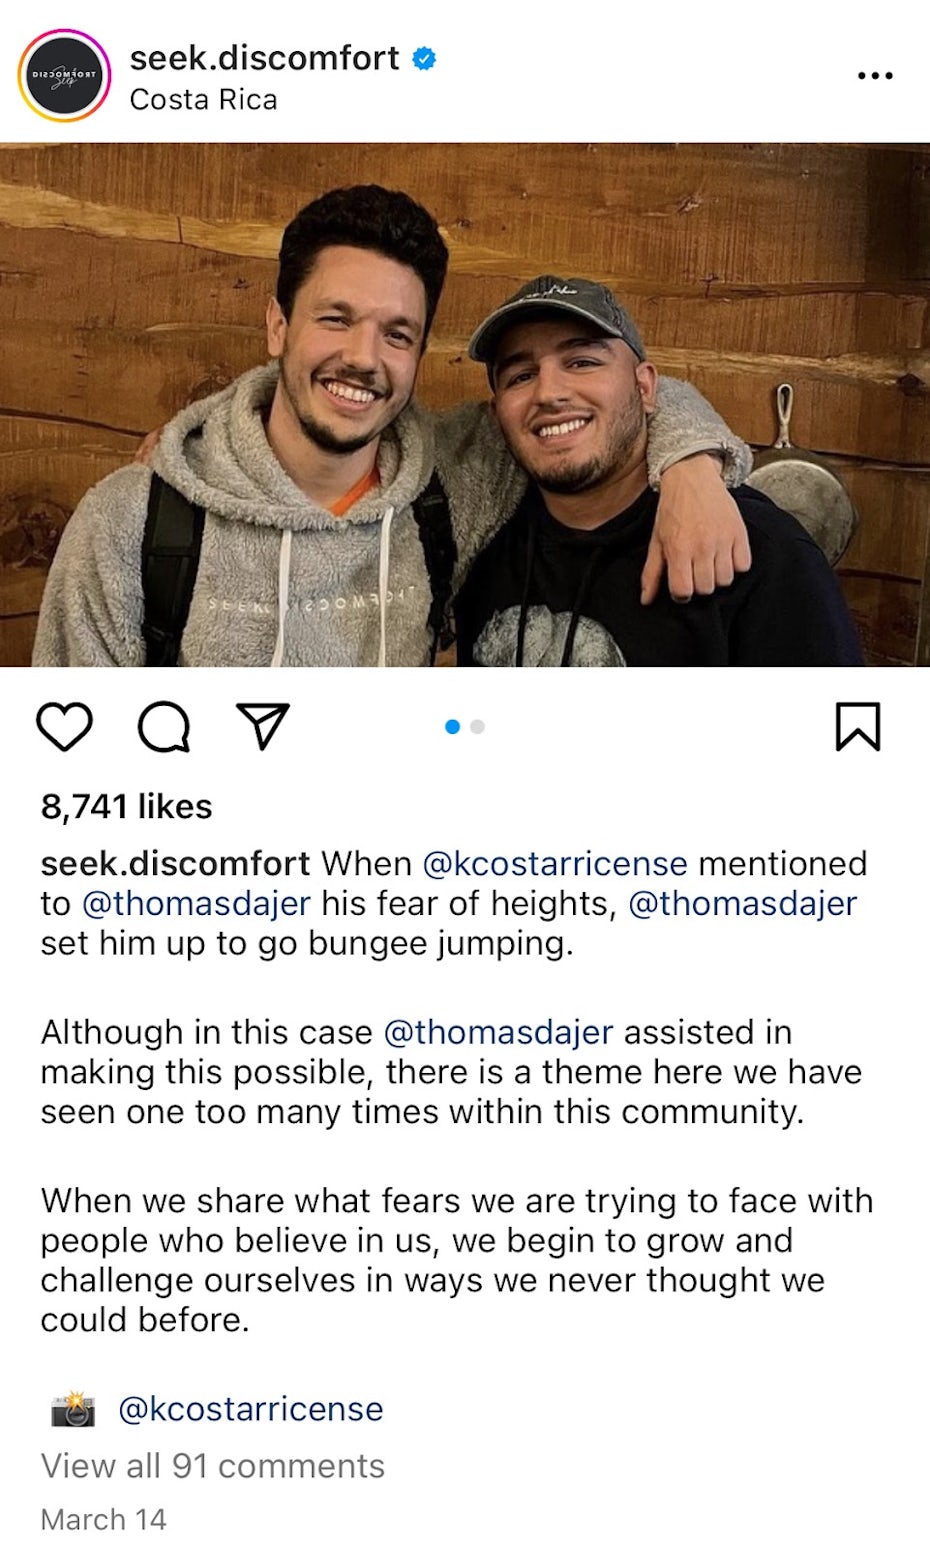 Screenshots from the Instagram page of Seek Discomfort that demonstrate their personable and inspirational approach